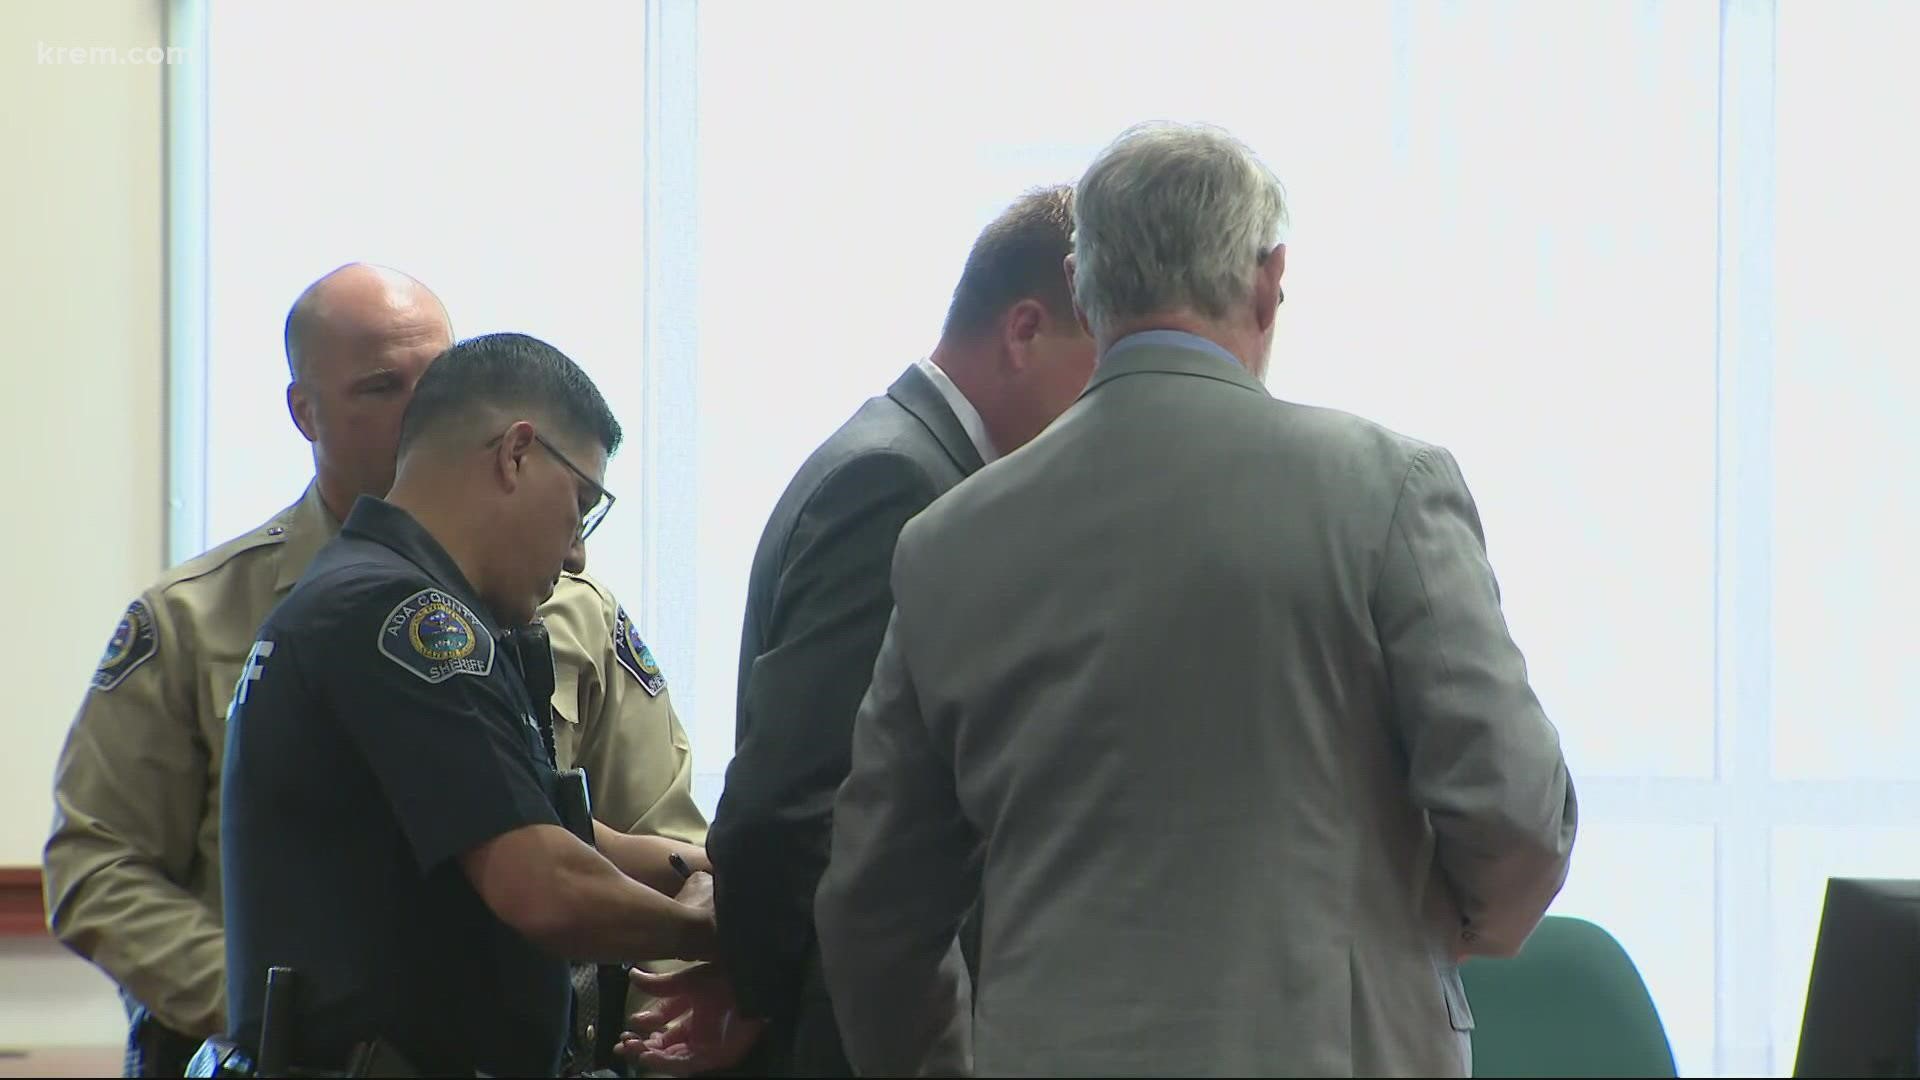 Aaron von Ehlinger faces up to life in prison at his July sentencing.